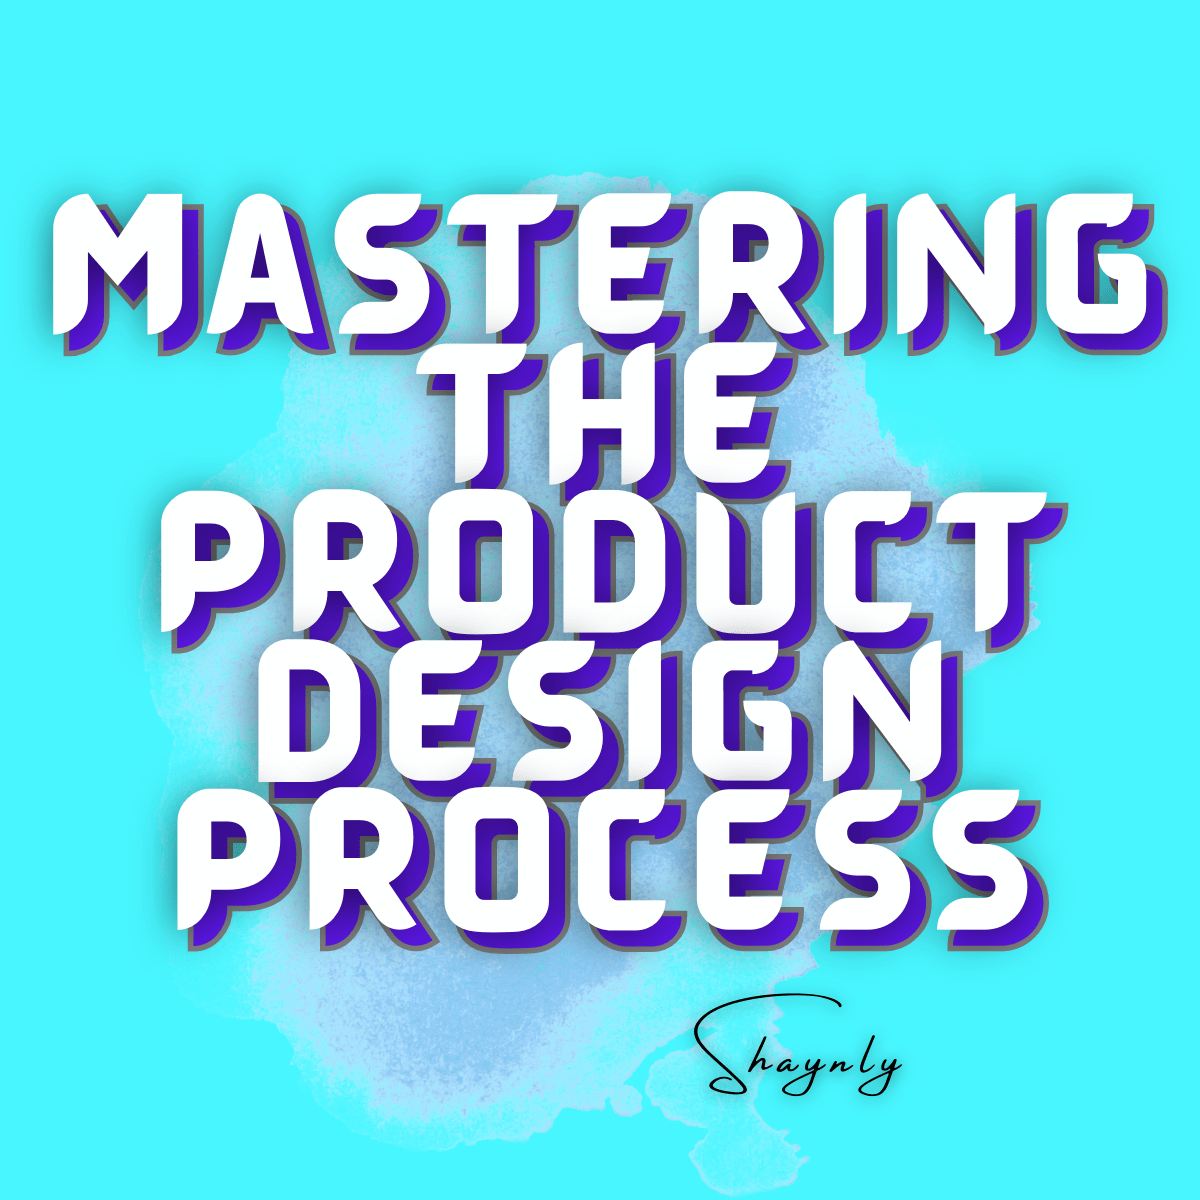 Mastering The Product Design Process